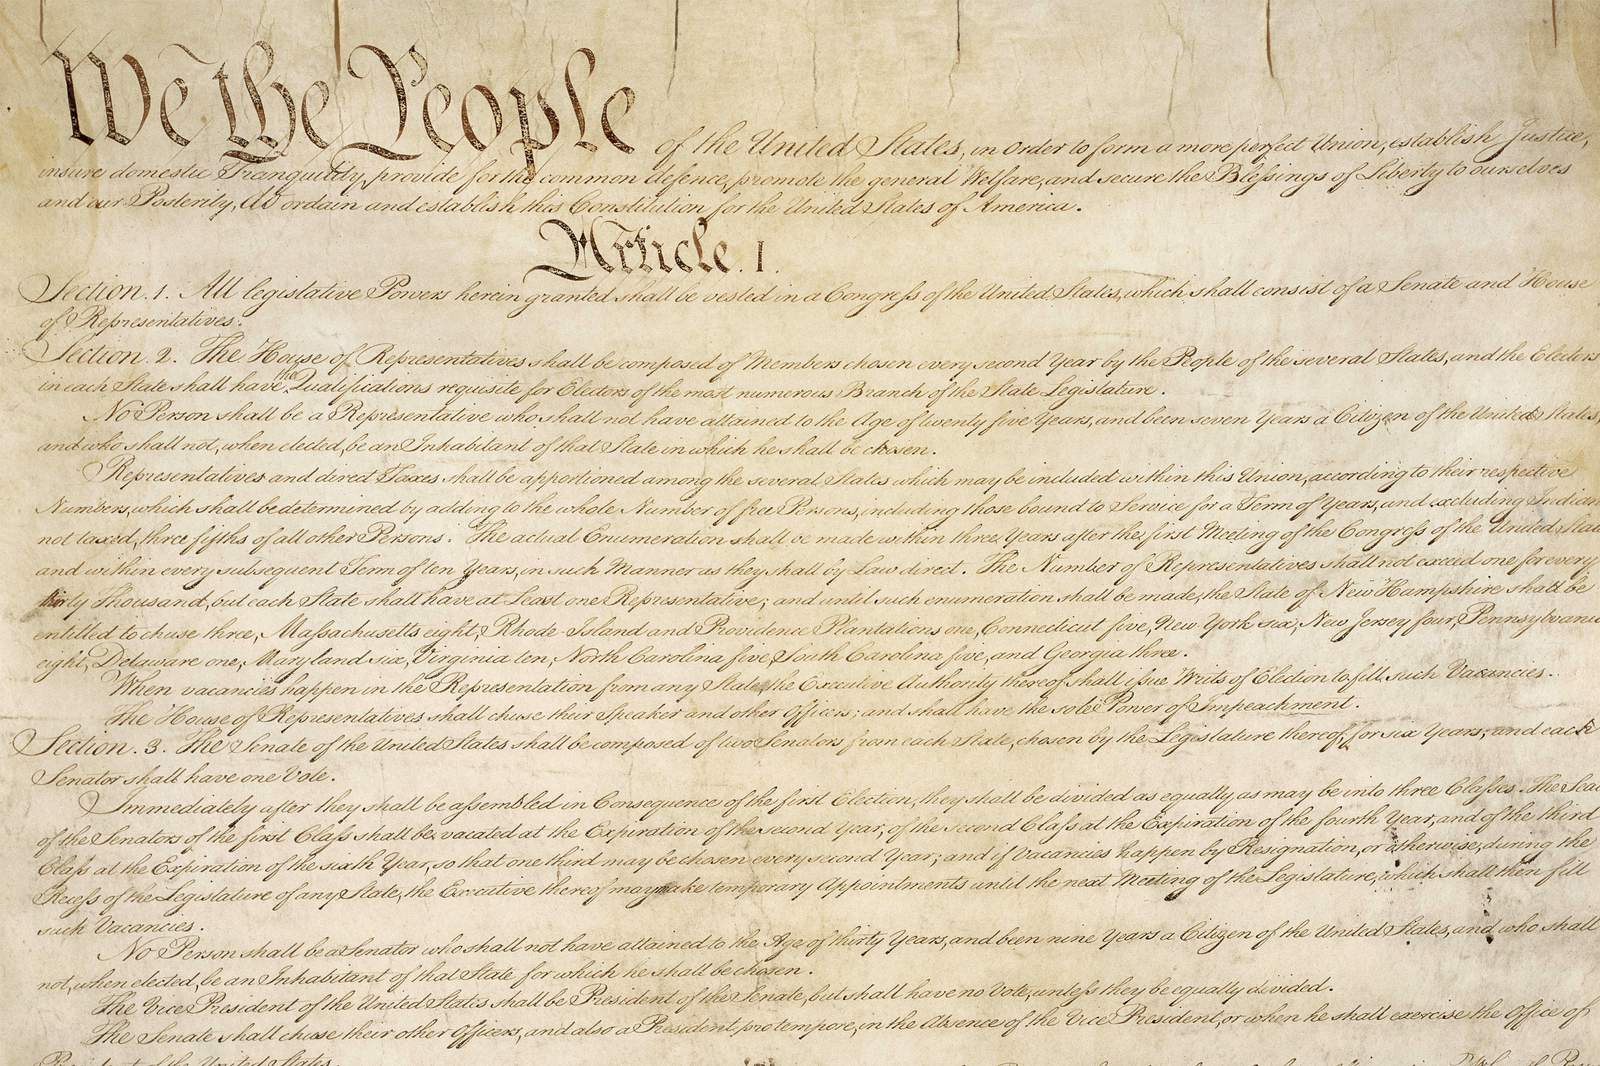 Sales of US Constitution topped 1 million during Trump years